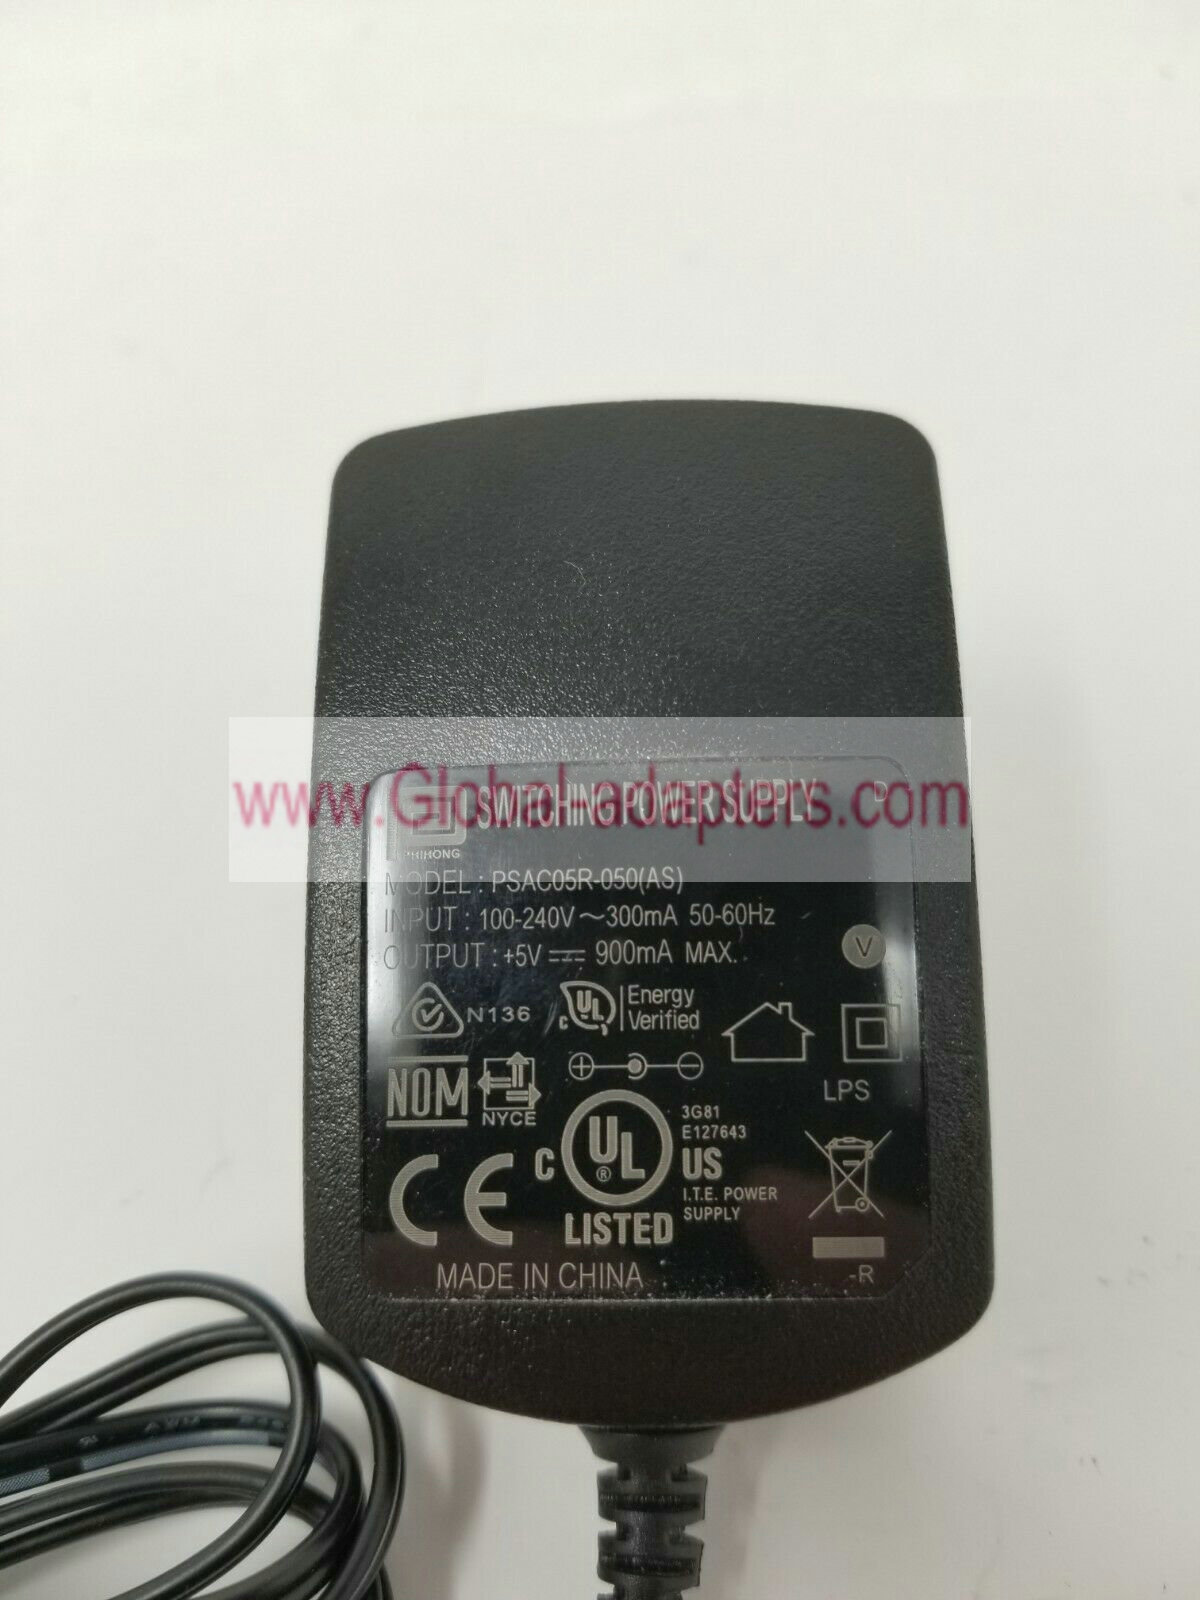 New Phihong PSAC05R-050(AS) 5V 900mA Ascom DC3-AABA Wall Charger for d41 d62 and i62 Wireless Phones